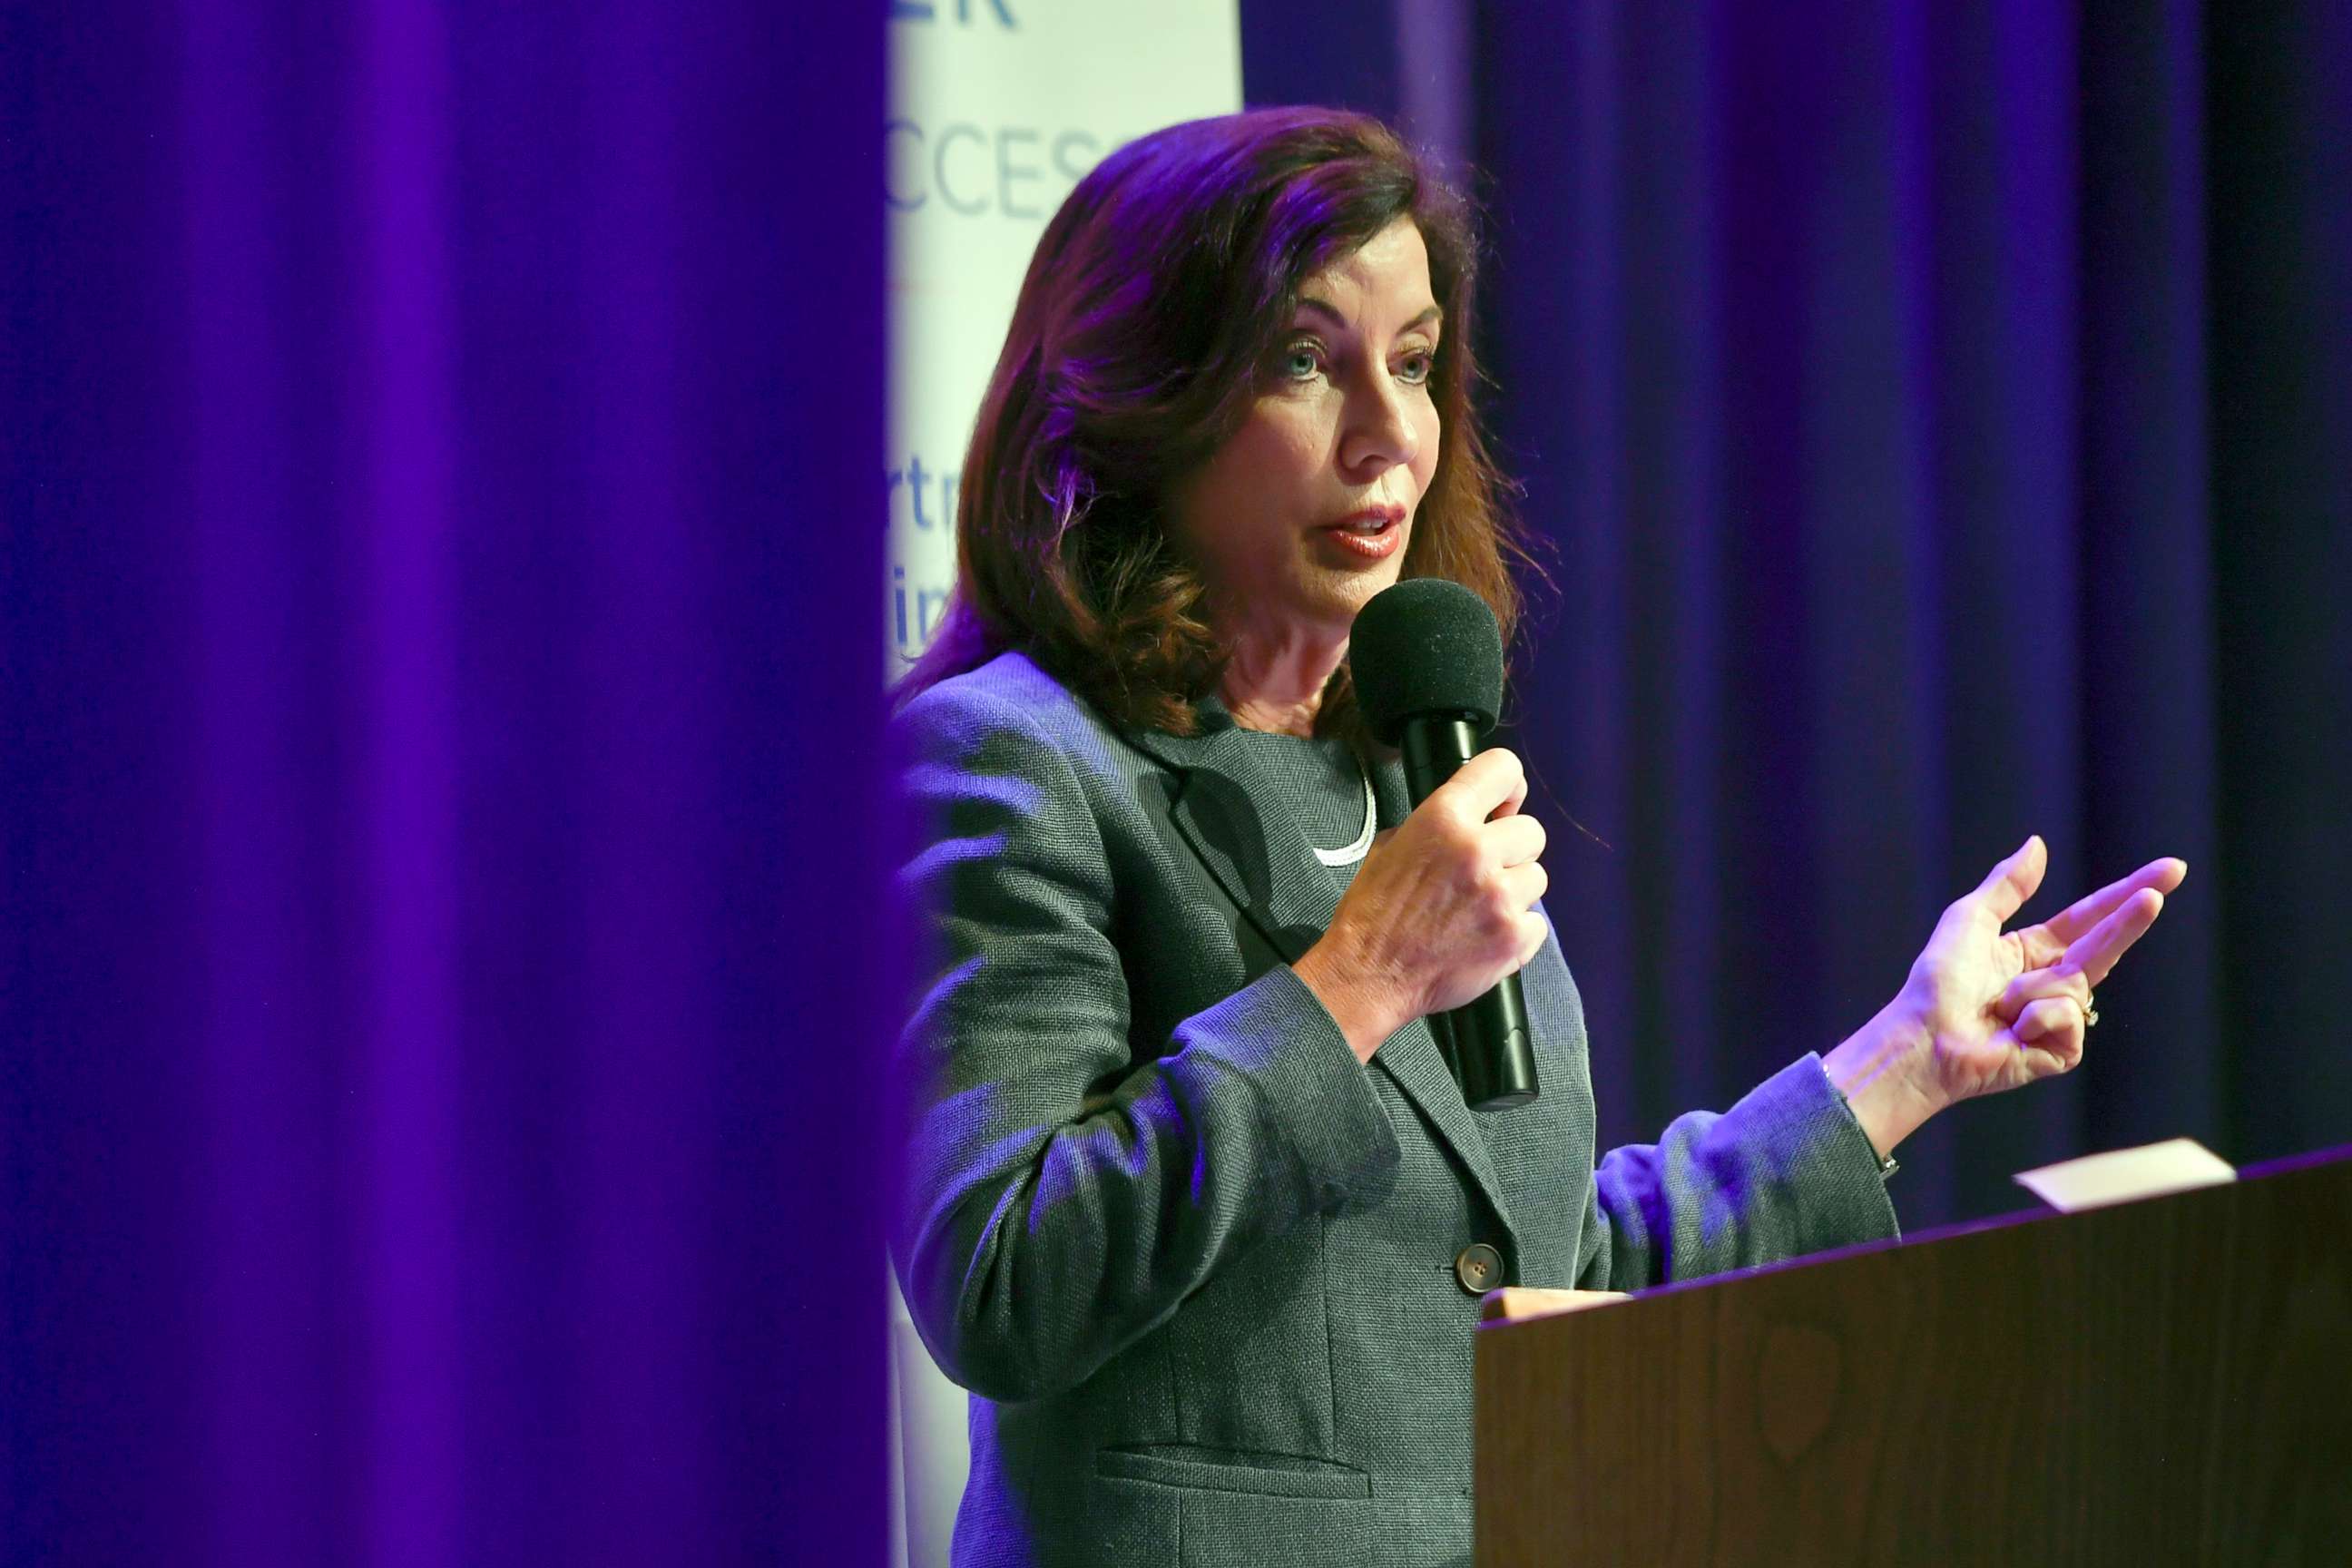 PHOTO: Gov. Kathy Hochul delivers remarks at a gubernatorial forum hosted by the Rochester Chamber of Commerce in Rochester, New York, Oct. 7, 2022.